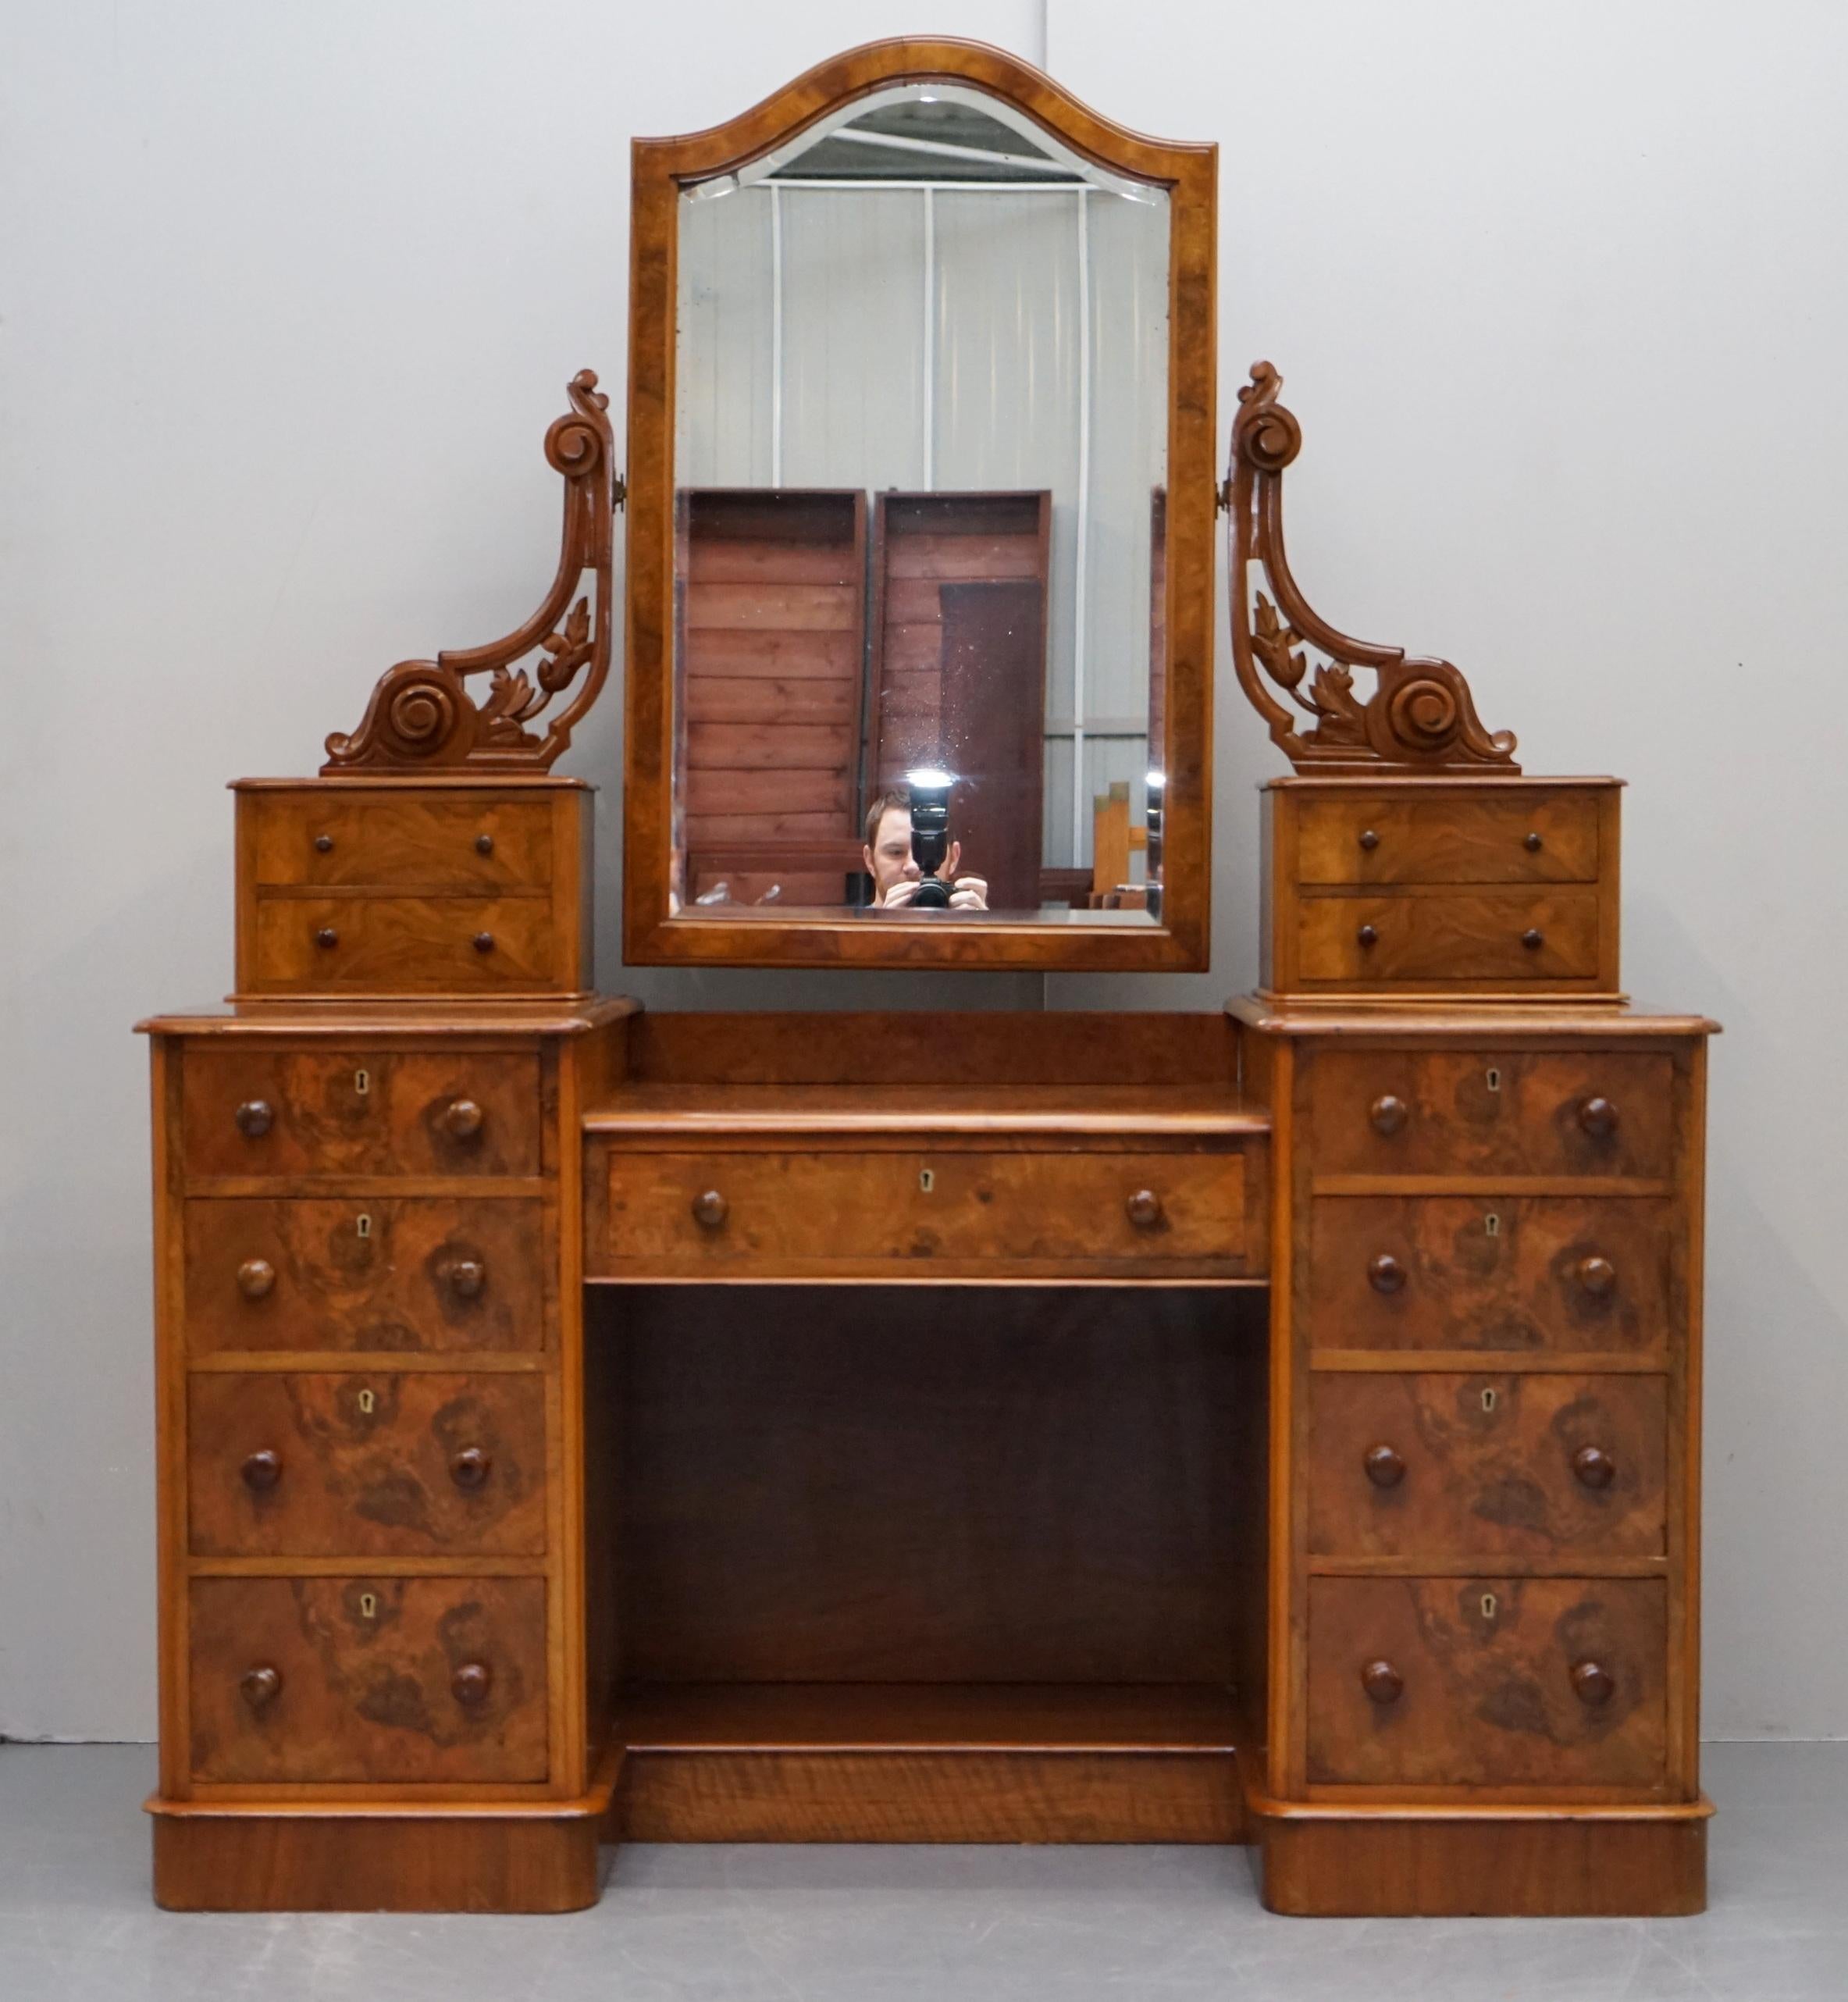 We are delighted to offer for sale this lovely hand made in England circa 1880 completely bur walnut dressing table with original mirror

This is pretty much the best looking and well made dressing table you will ever see, the timber cuts of